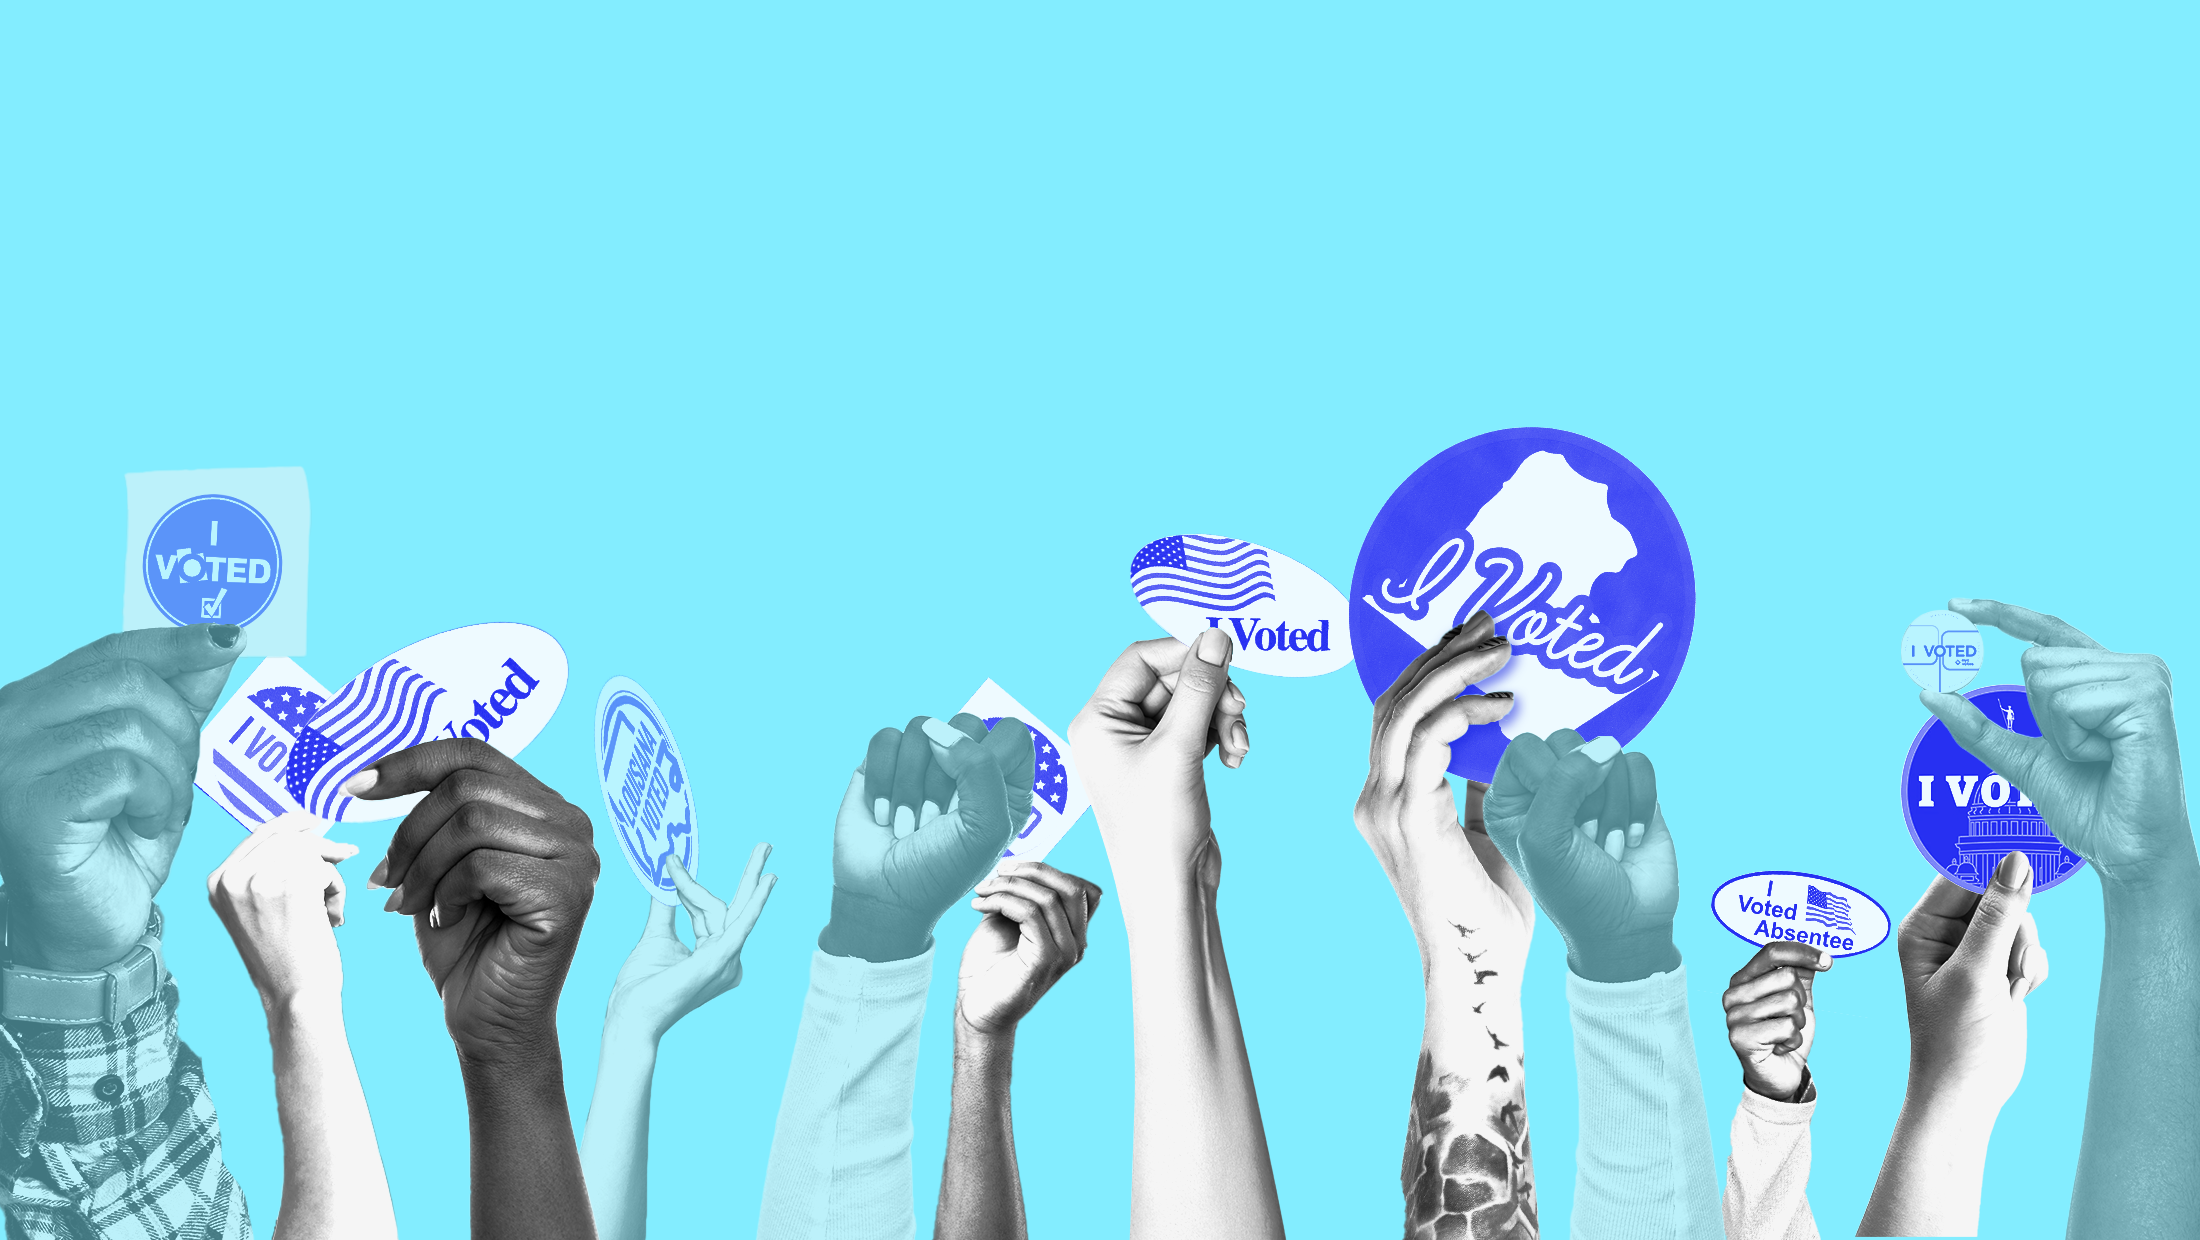 Light blue background with images of young people's hands holding blue and white I Voted stickers.